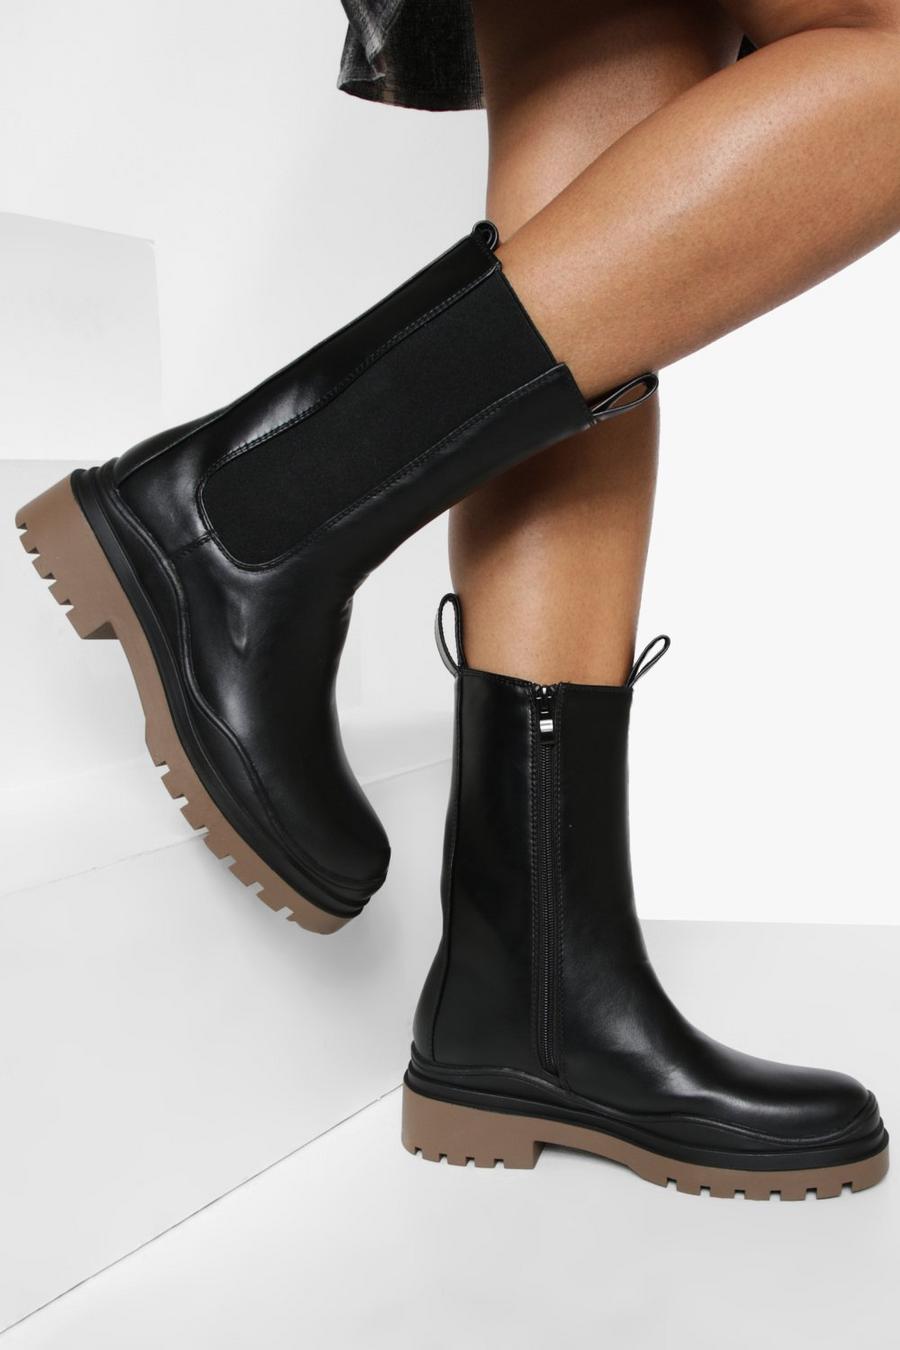 Contrast Sole Calf Height Chelsea Boots | boohoo